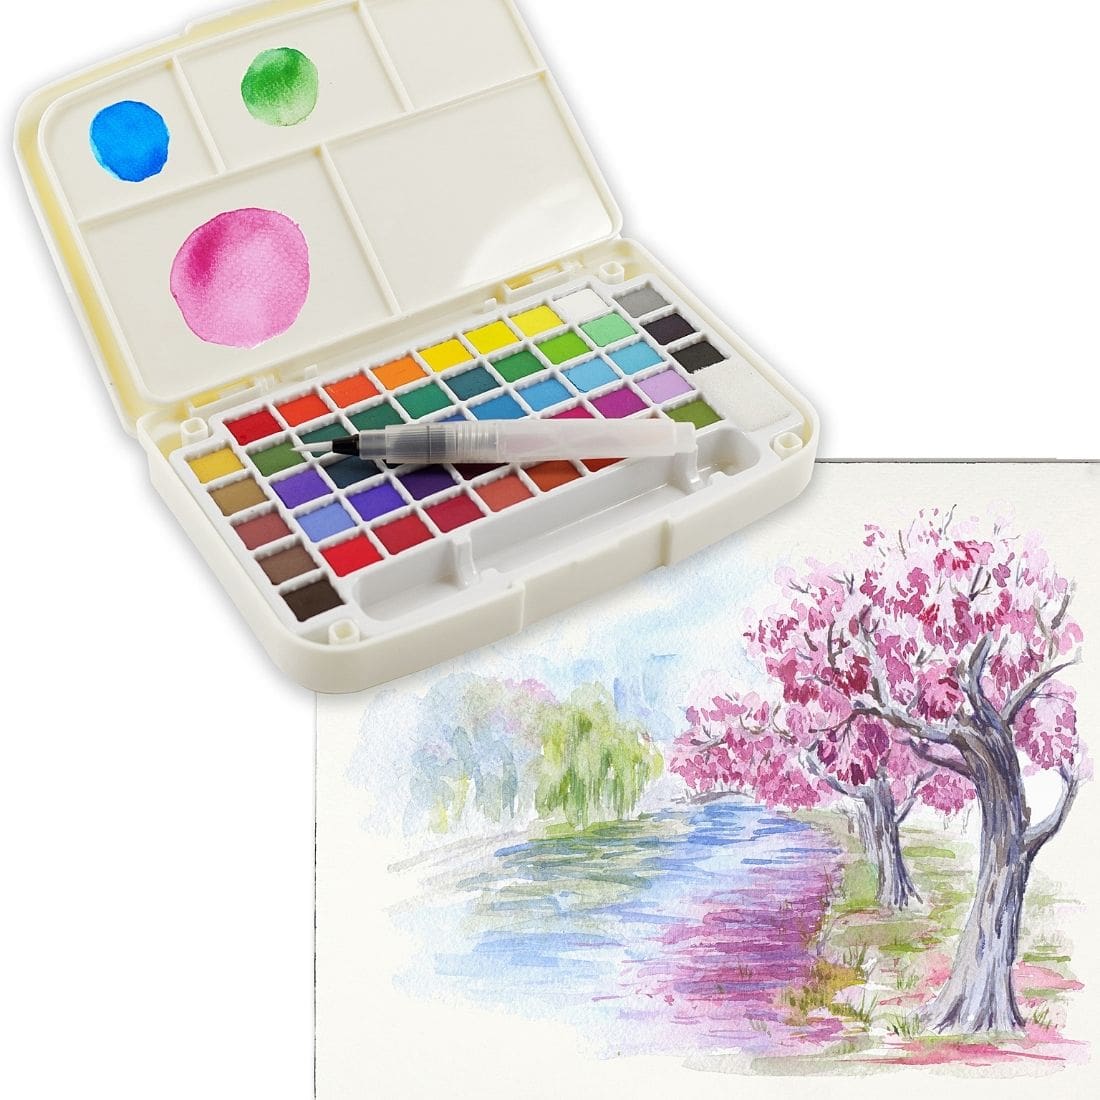 Peter Pauper Press watercolour field kit for painting on the go - Paper Kooka